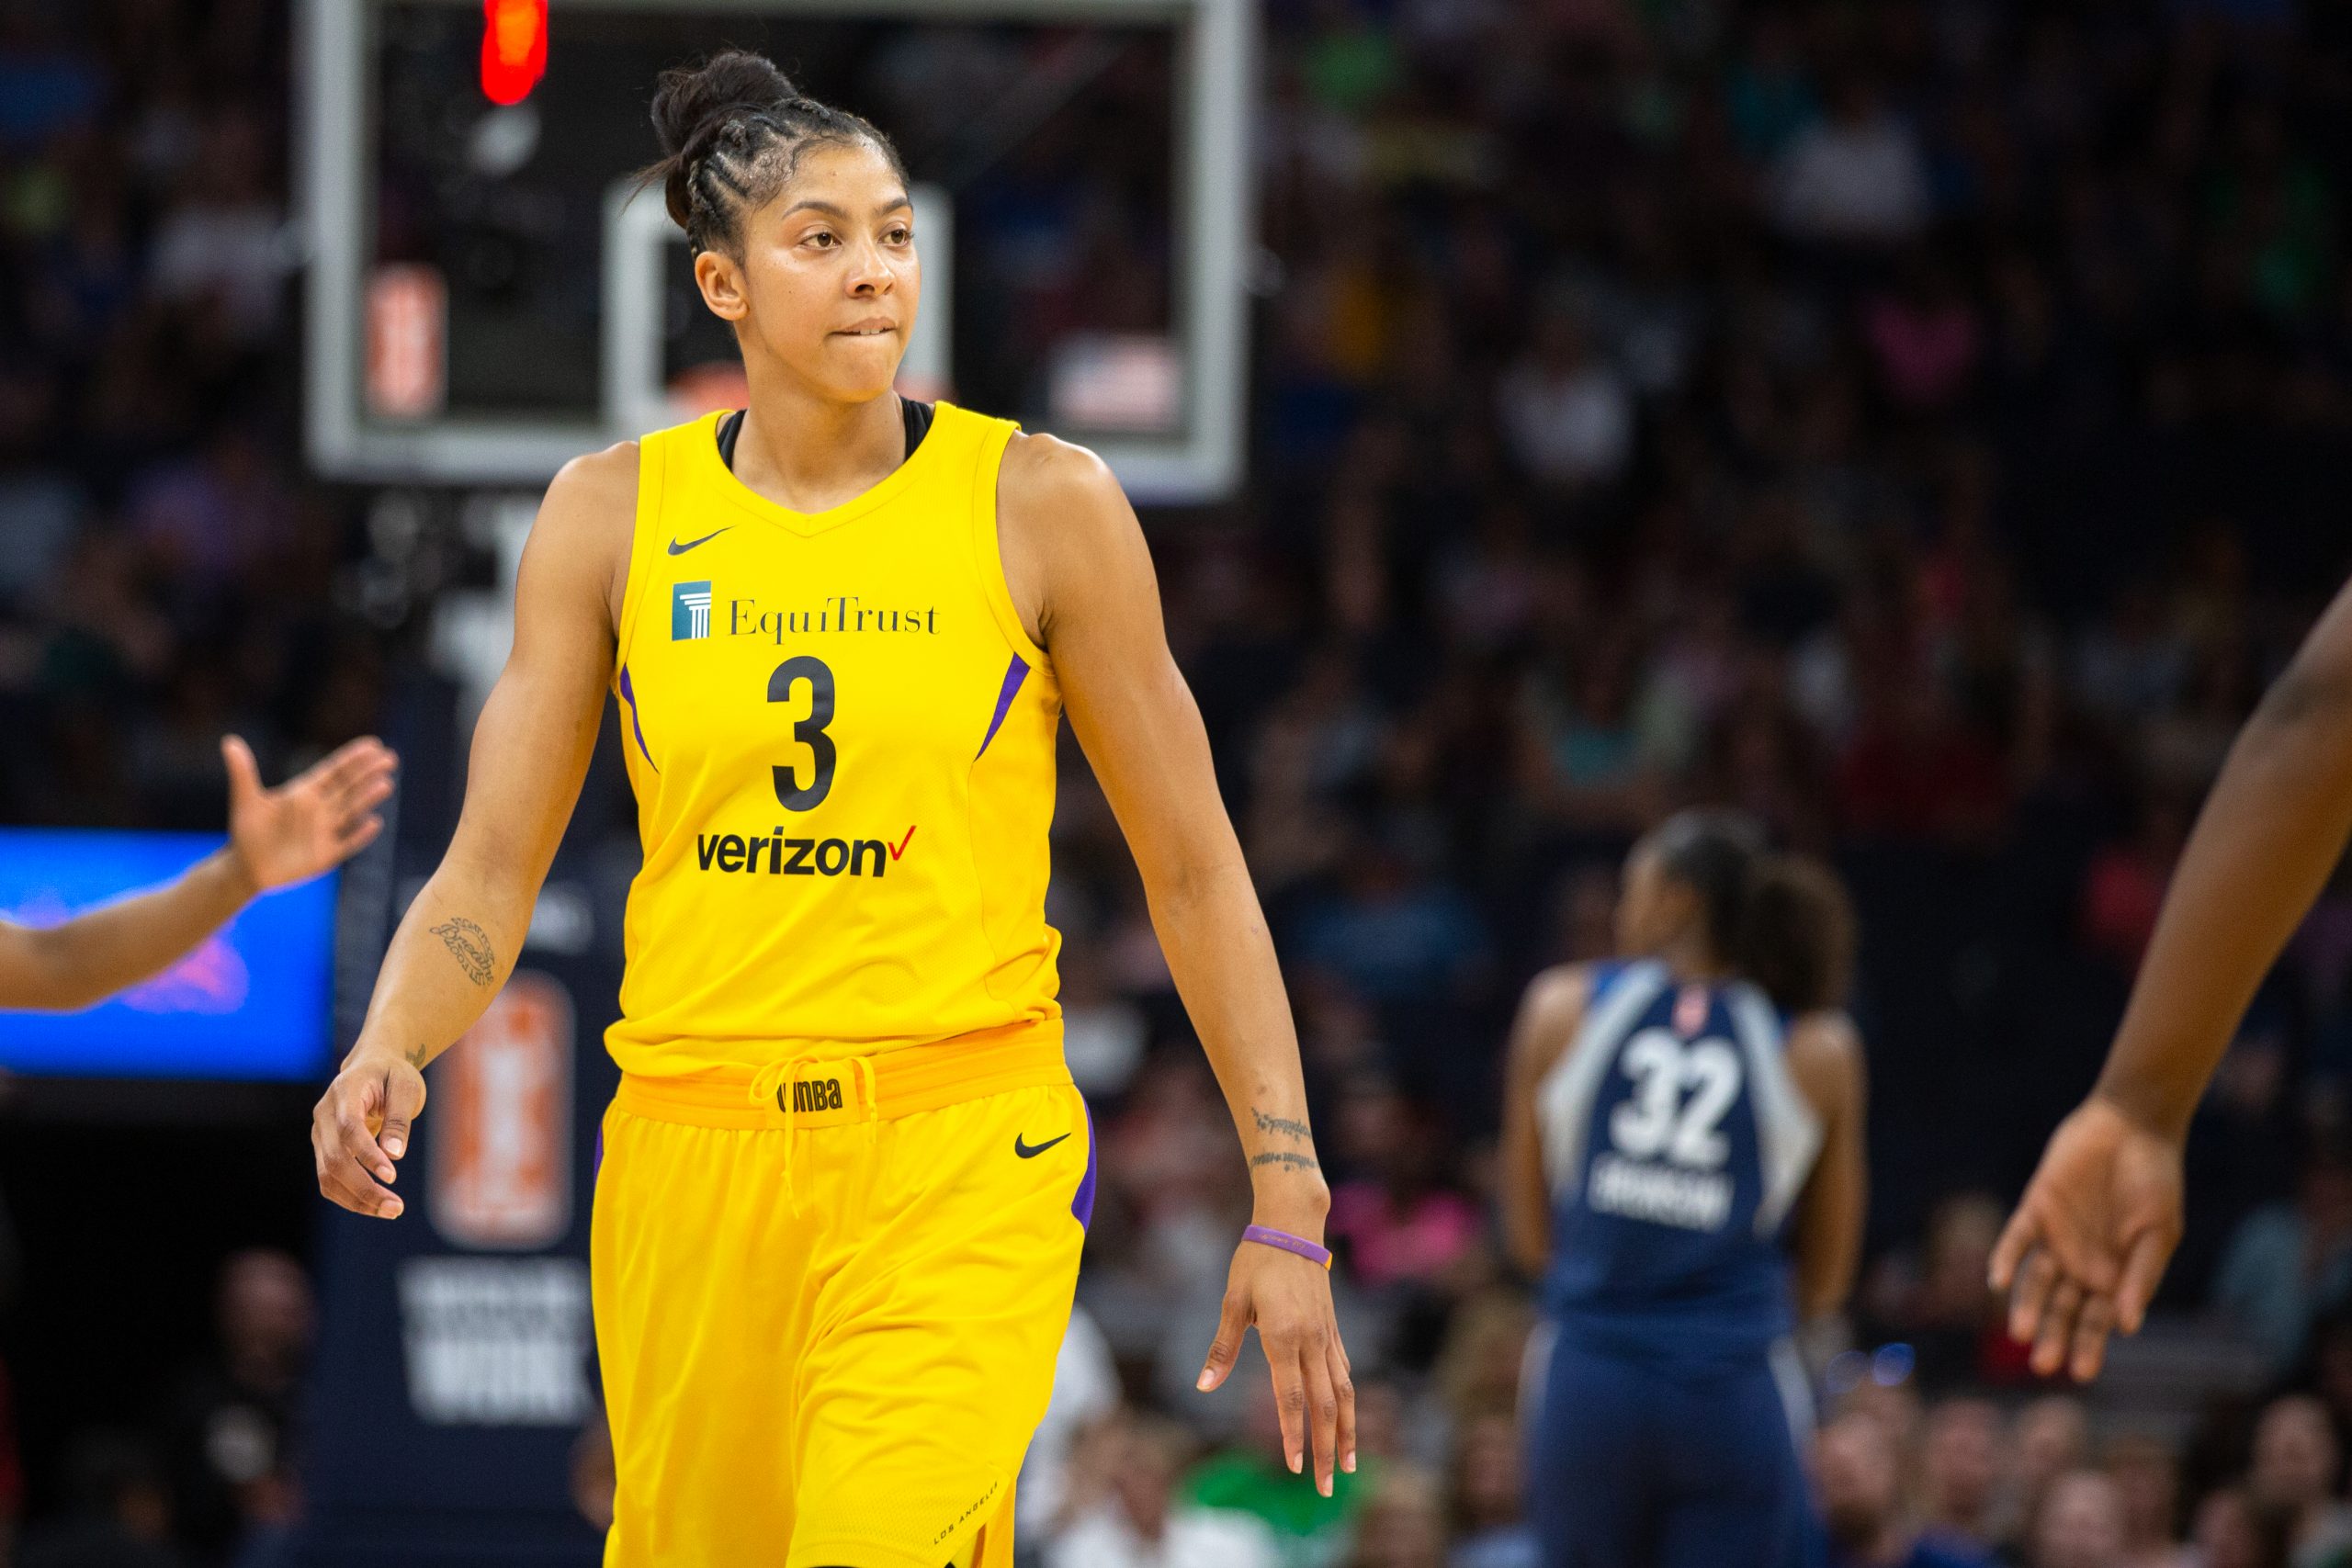 What is Candace Parker’s earlier life before becoming the All-star game starter